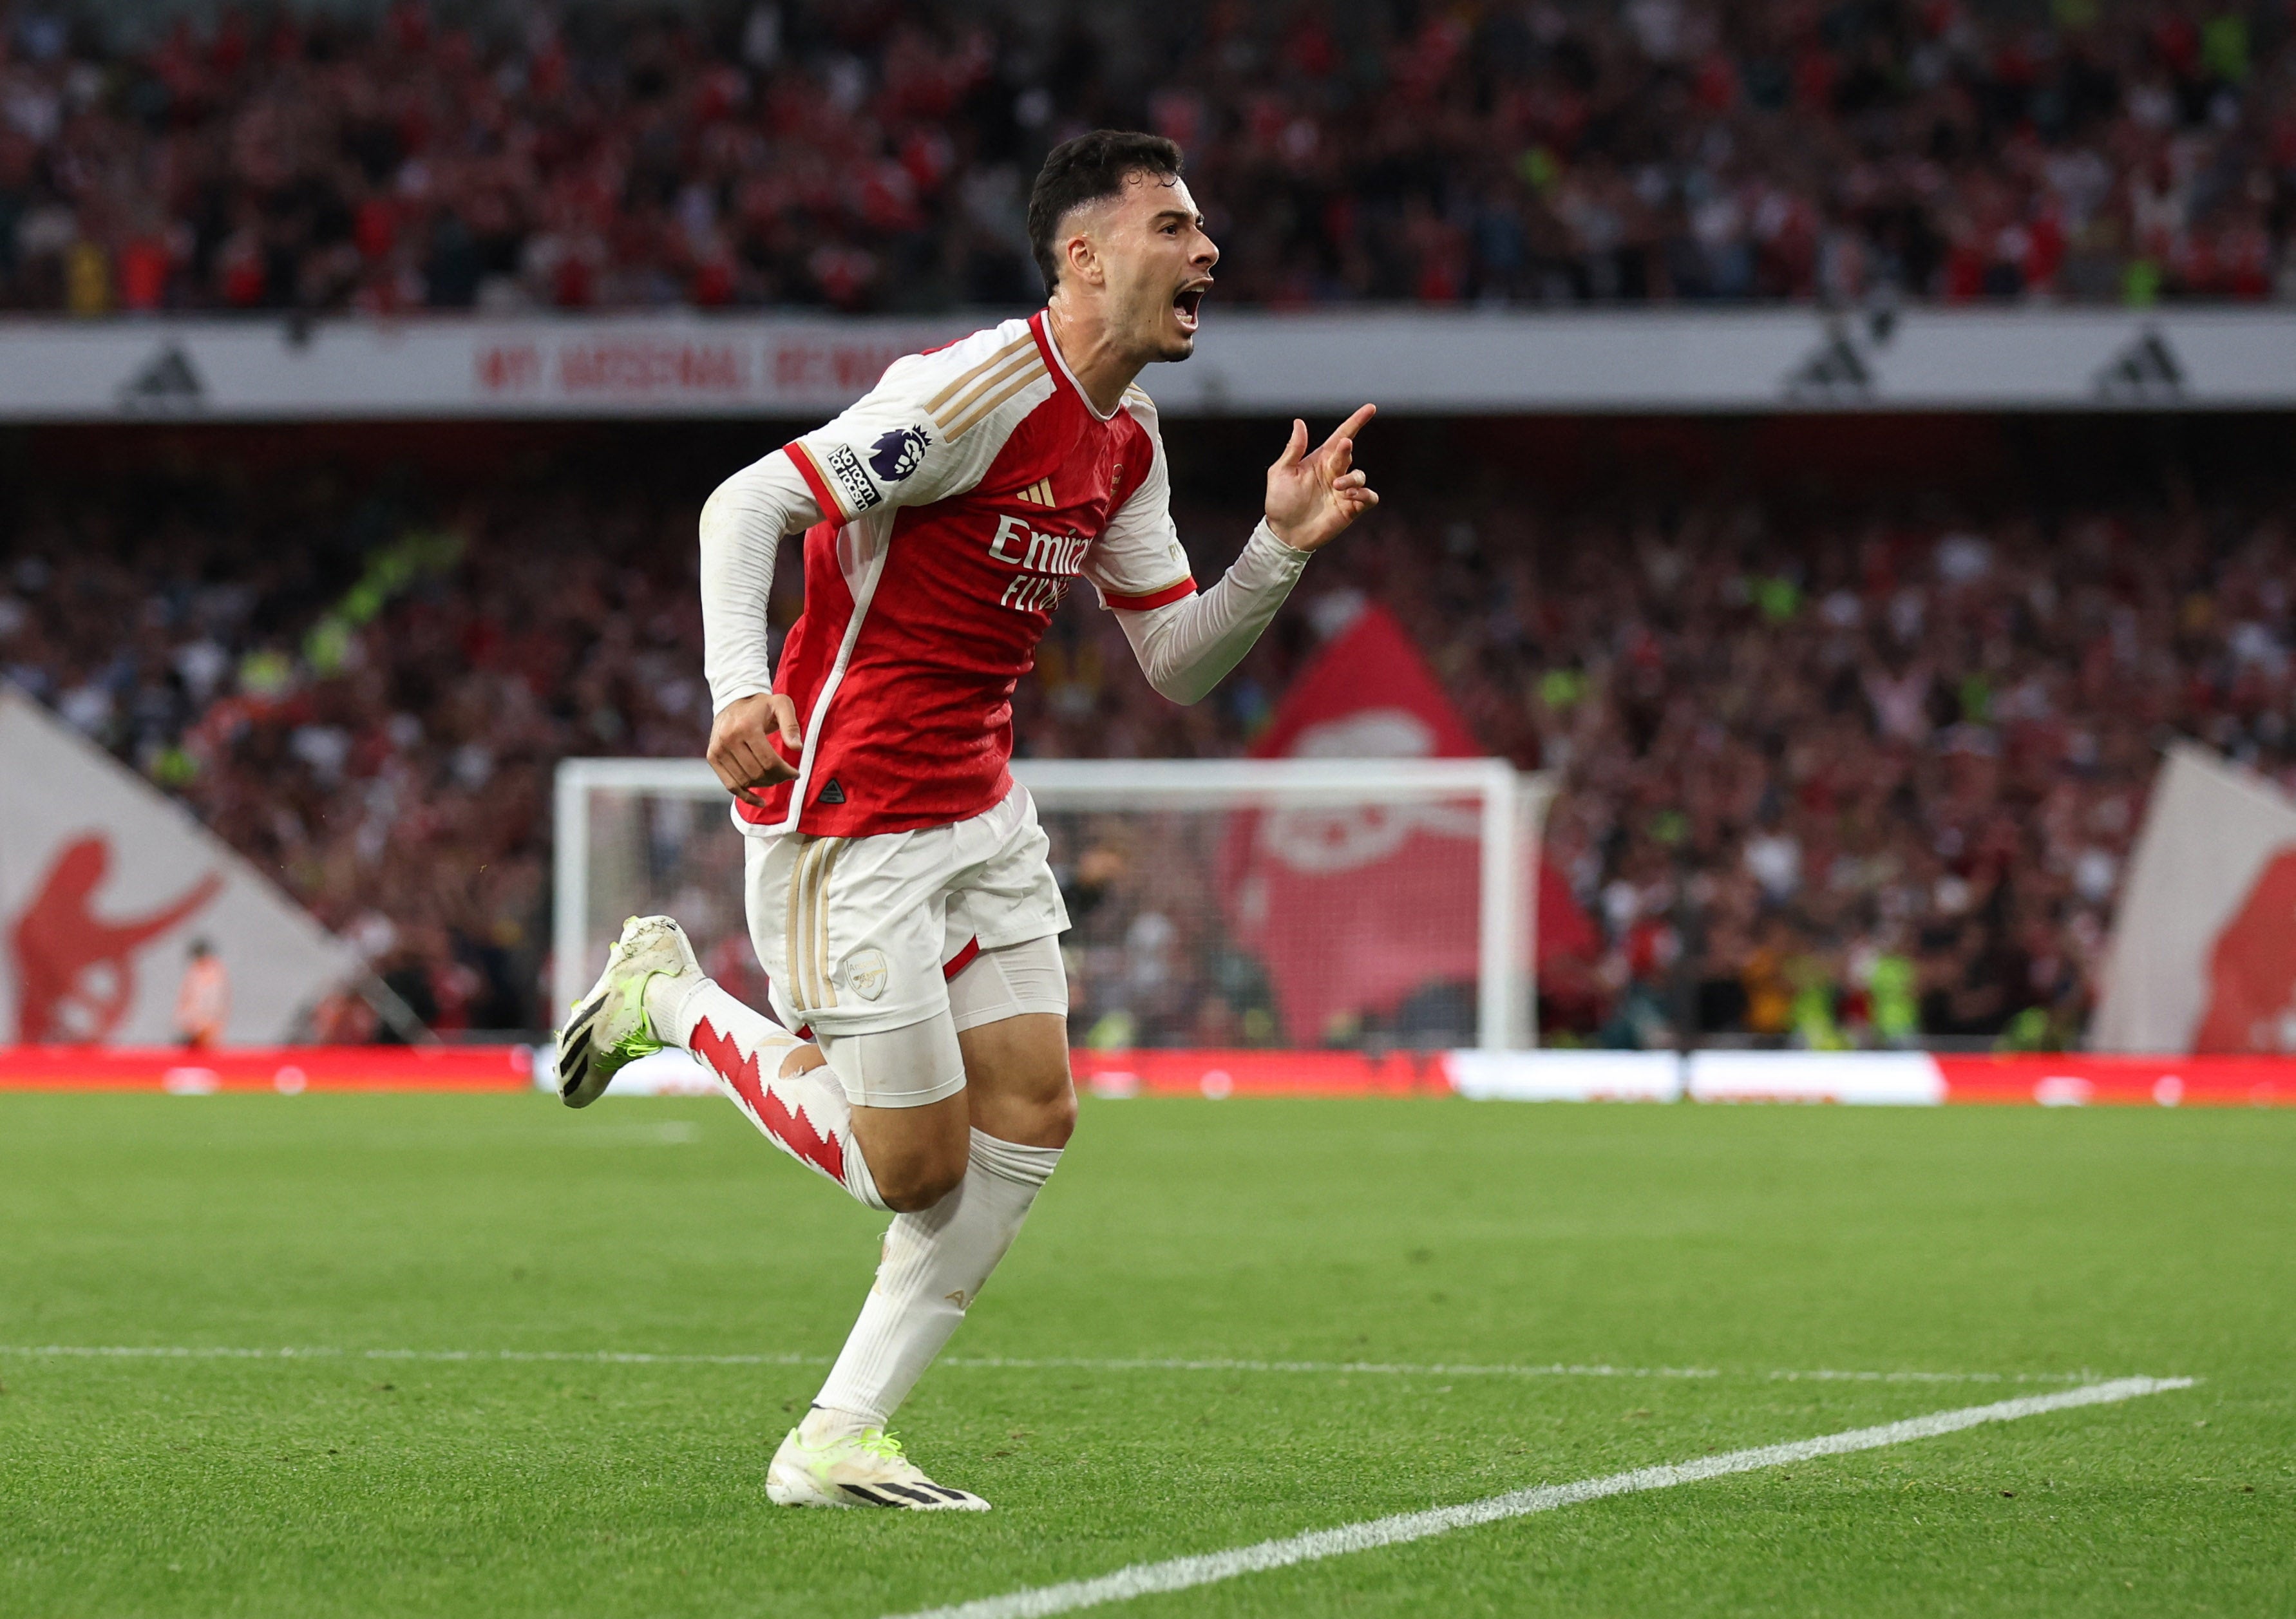 Arsenal’s Gabriel Martinelli celebrates scoring his side’s late winner against Manchester City